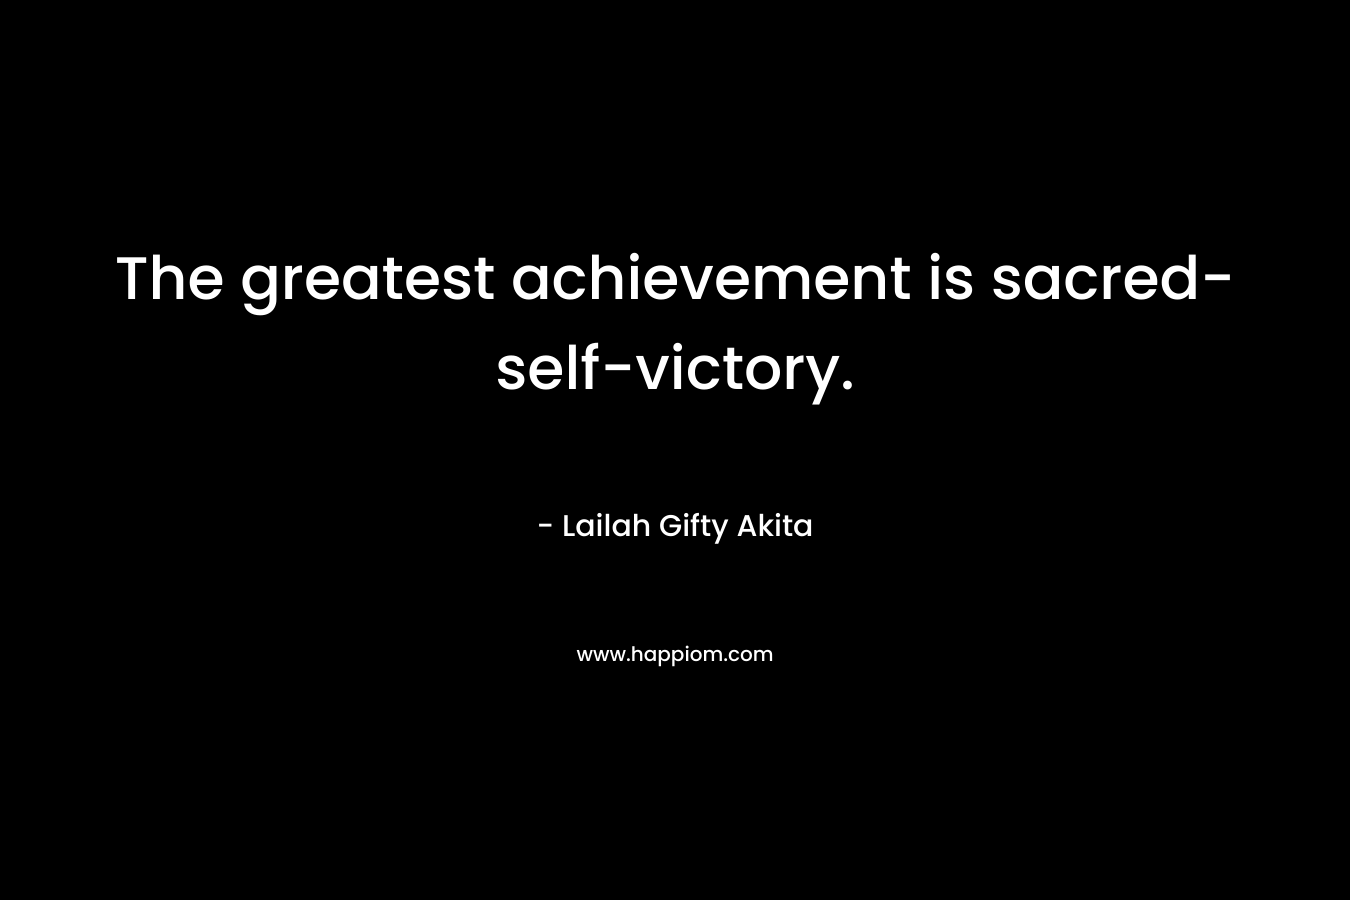 The greatest achievement is sacred-self-victory. – Lailah Gifty Akita